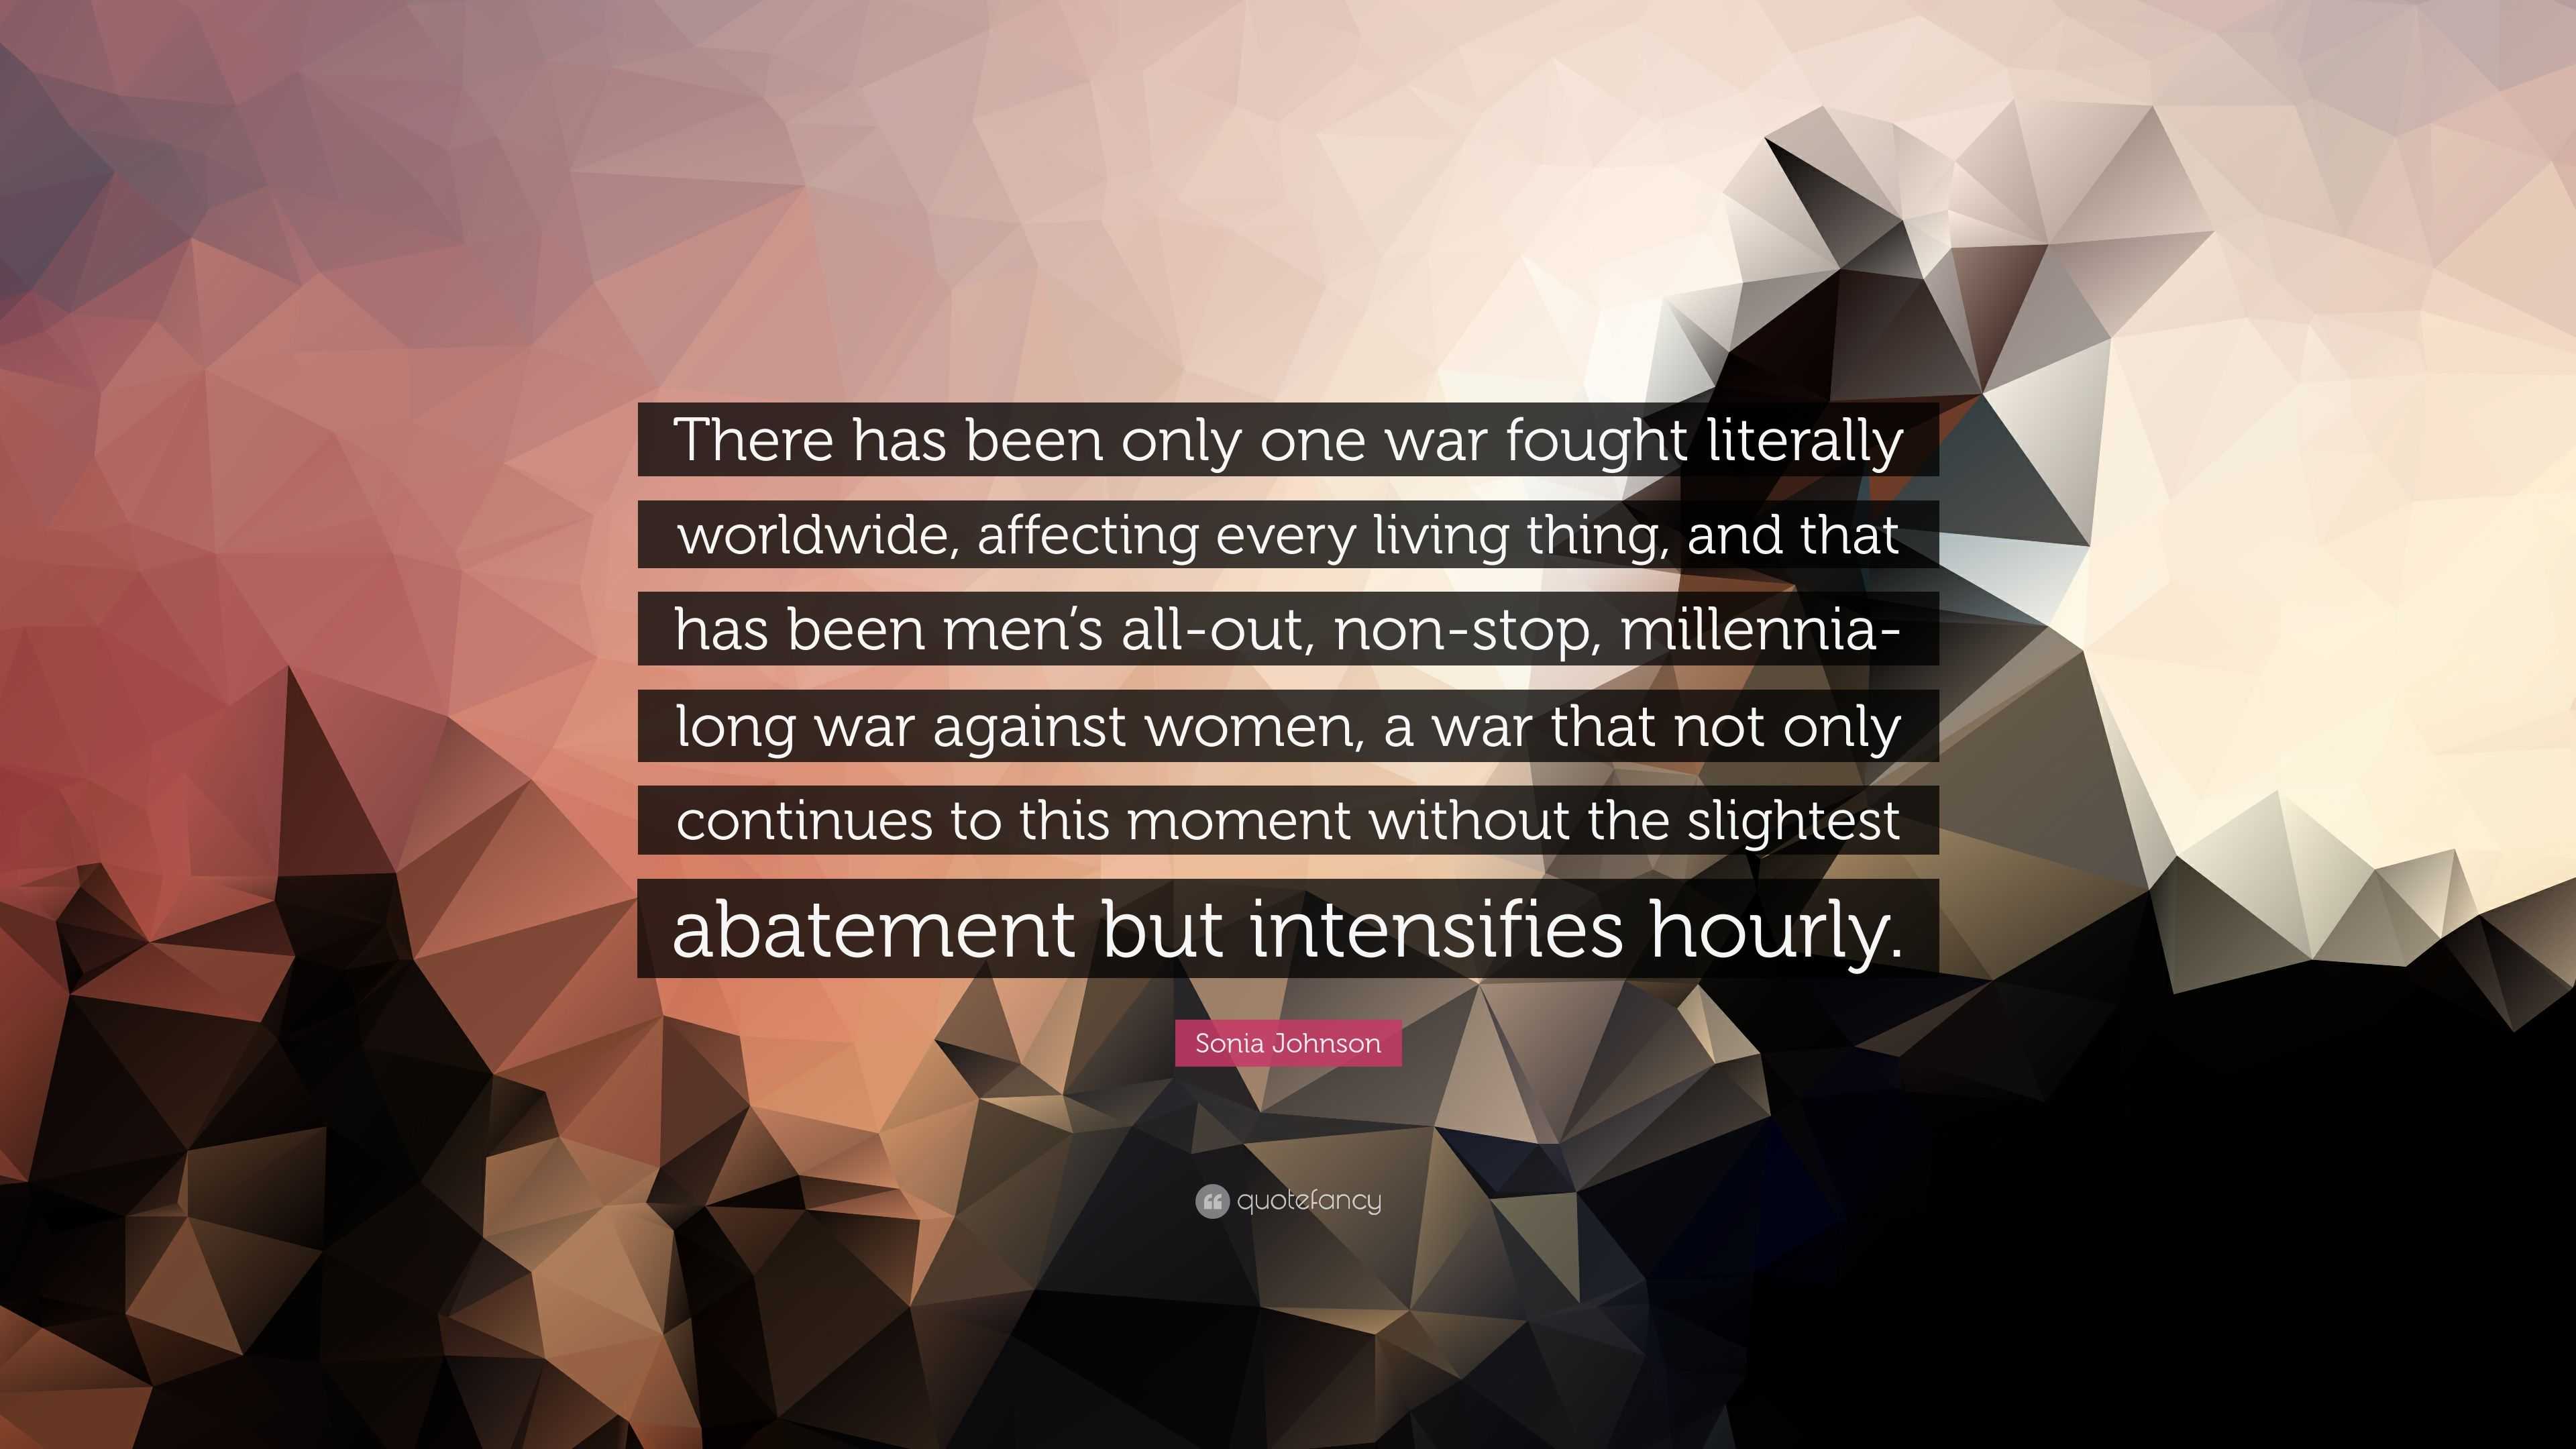 https://quotefancy.com/media/wallpaper/3840x2160/3016224-Sonia-Johnson-Quote-There-has-been-only-one-war-fought-literally.jpg